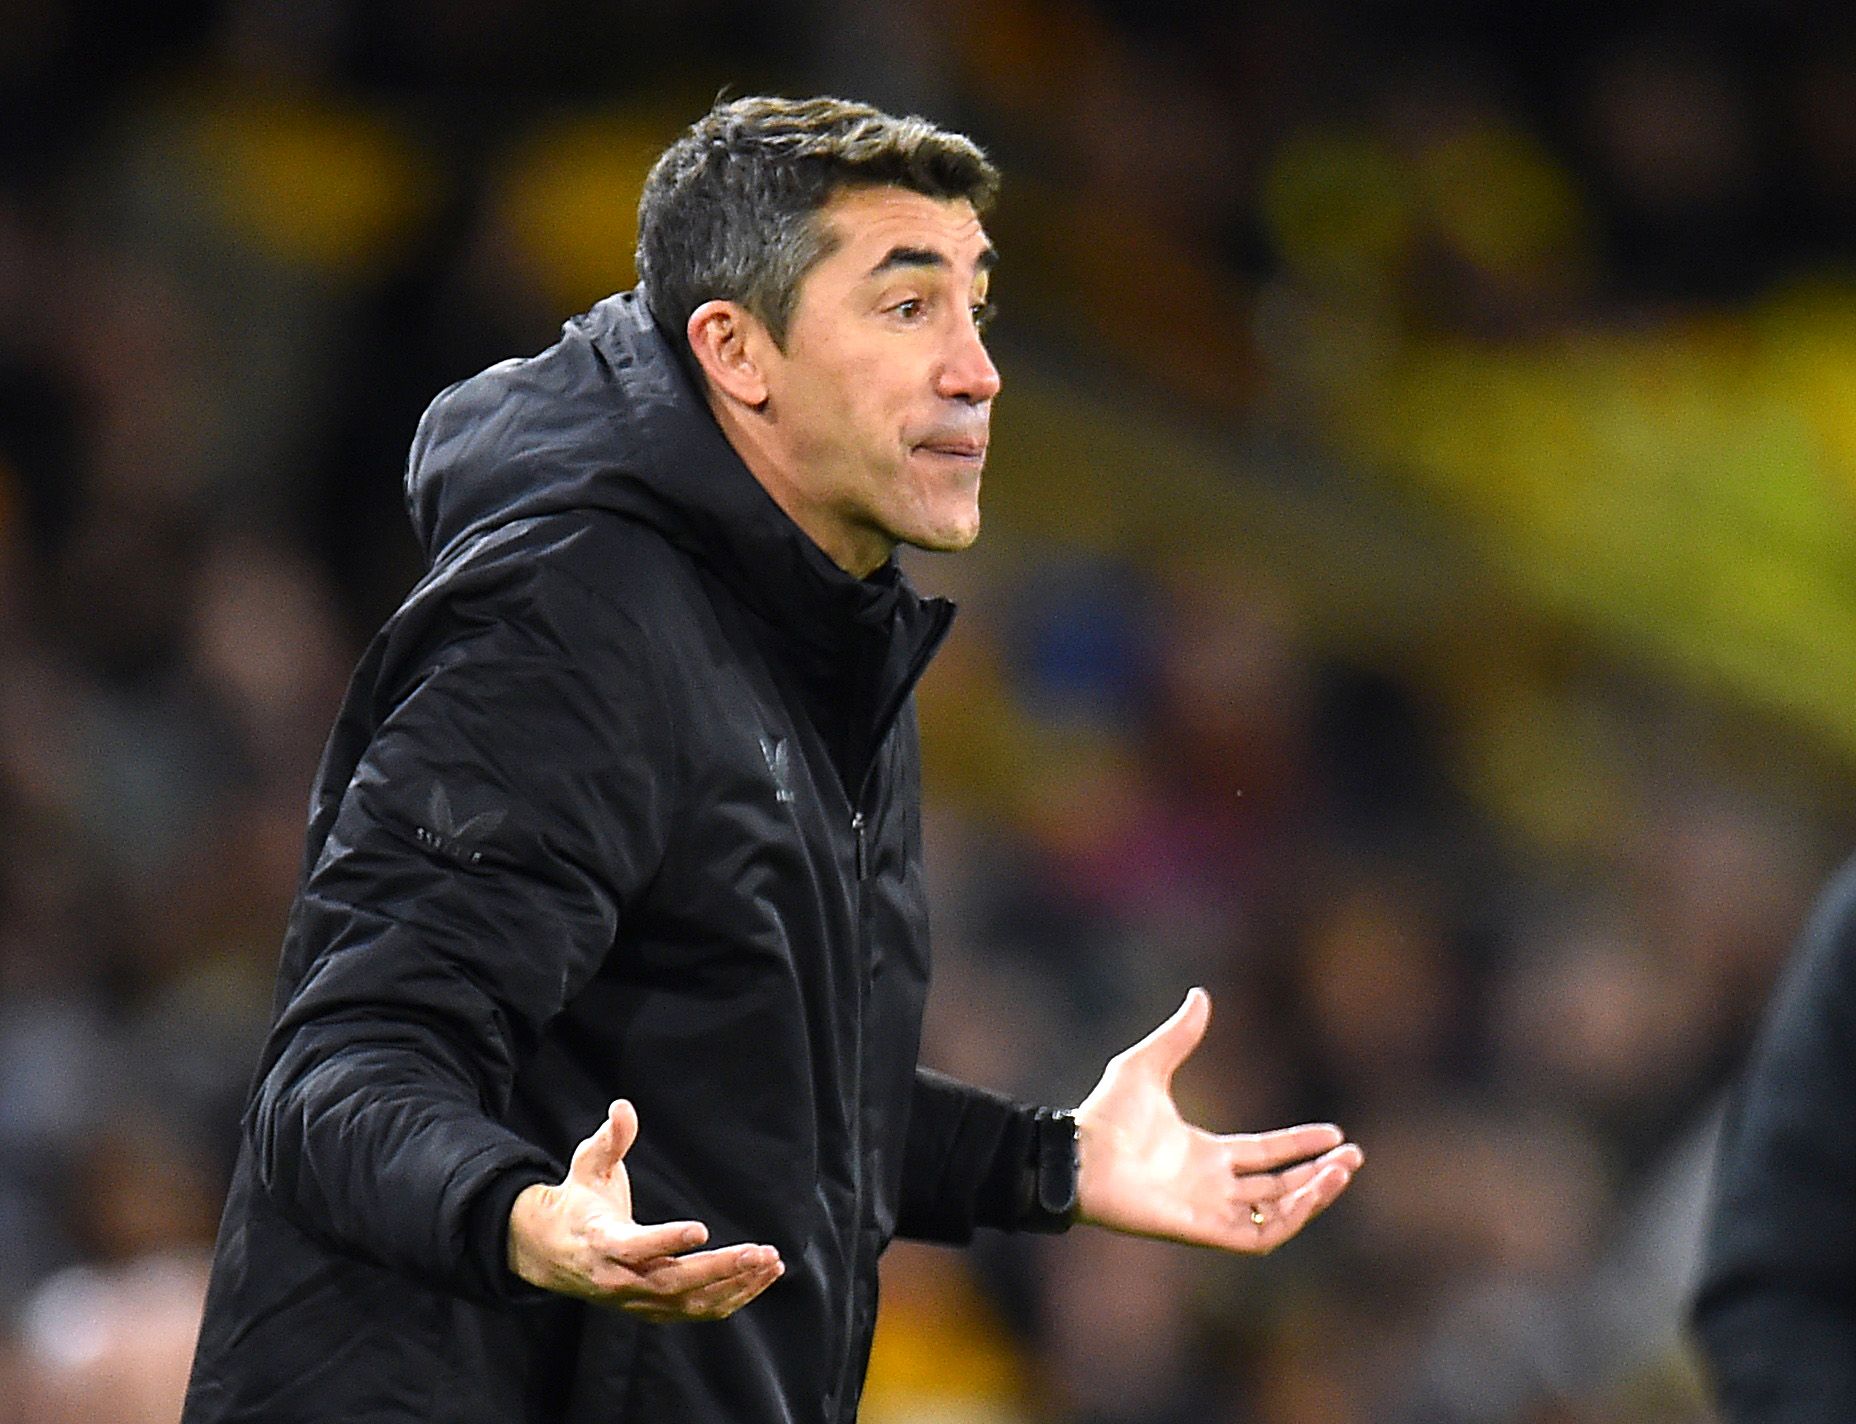 Bruno Lage, Fosun, Jeff Shi, Molineux, The Old Gold, Wolves, Wolves fans, Wolves info, Wolves latest, Wolves news, Wolves updates, WWFC, WWFC news, WWFC update, Premier League, Premier League news, Wolverhampton Wanderers, Wolves transfer news, January transfer window, Riqui Puig, Barcelona, Francisco Trincao, 
